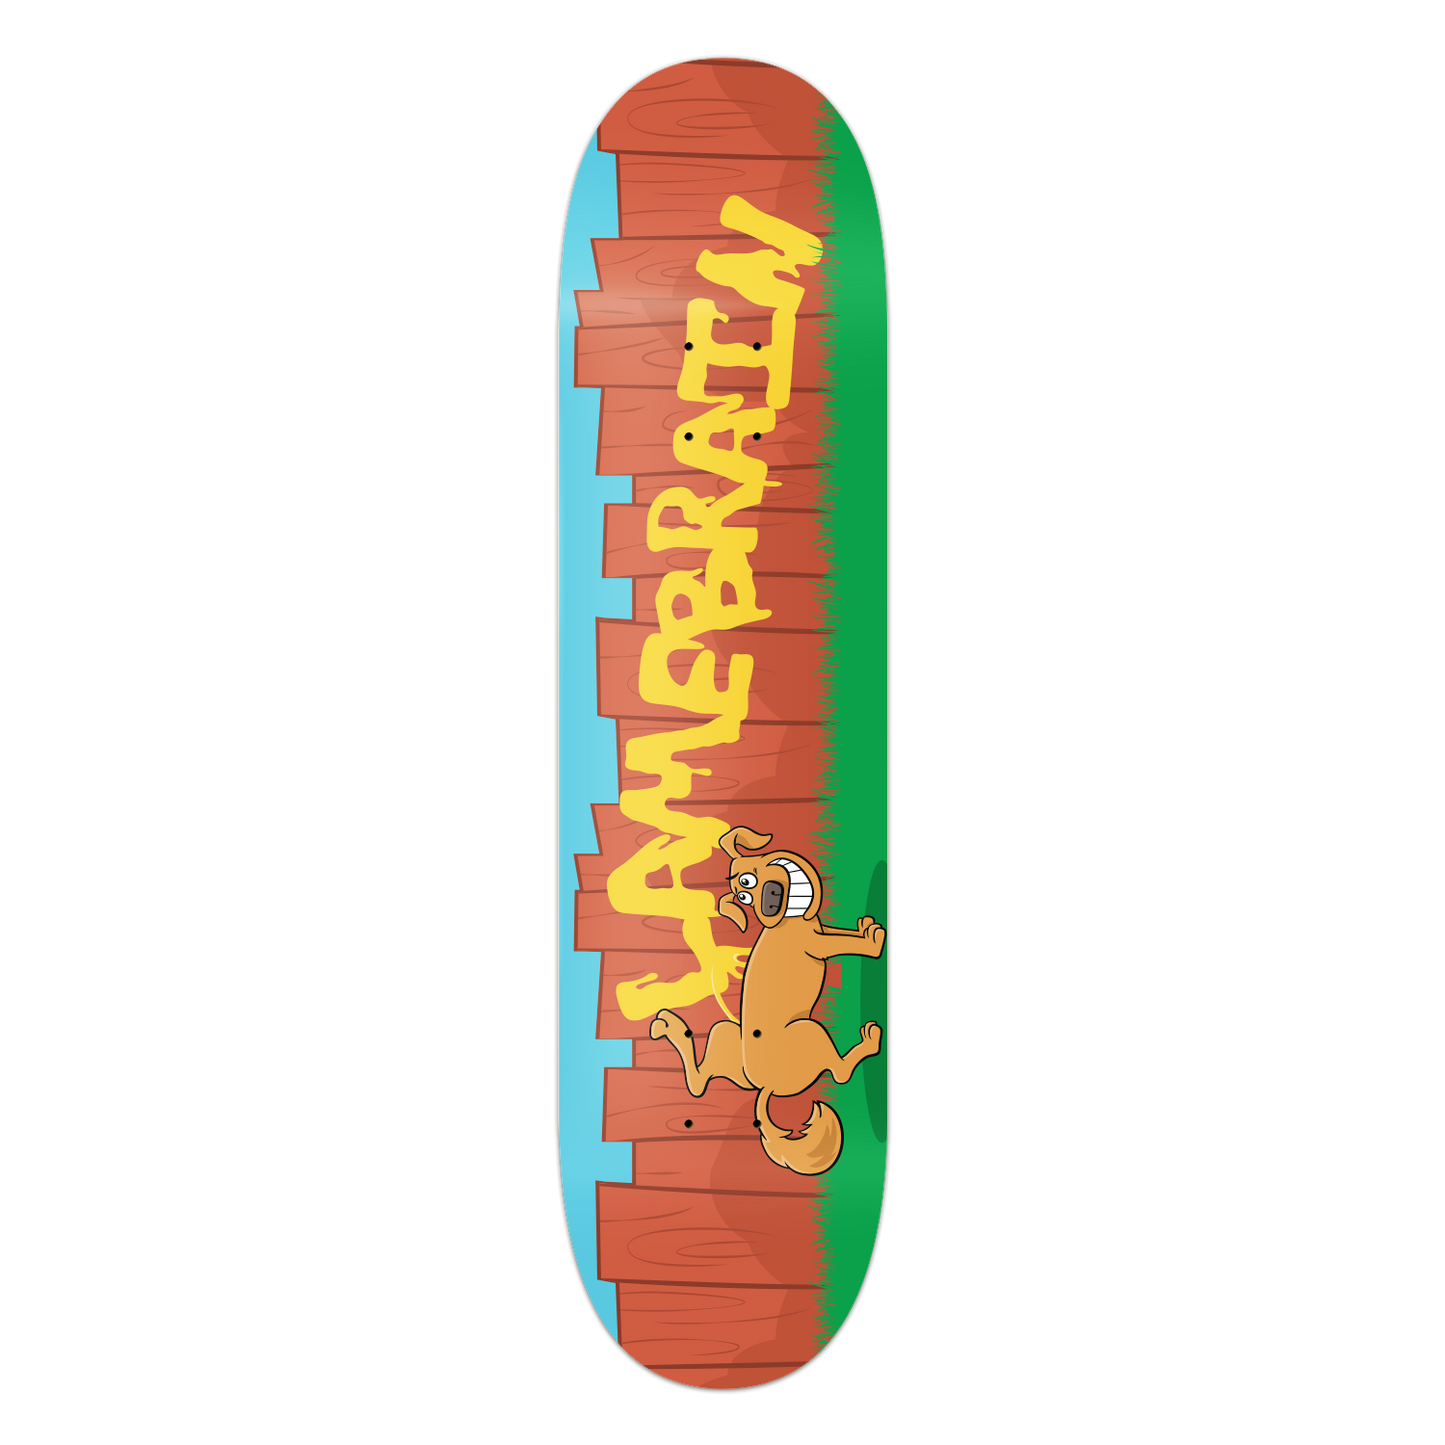 skateboard with cartoon picture of dog peeing on a fence that writing of the peeing says lamebrain